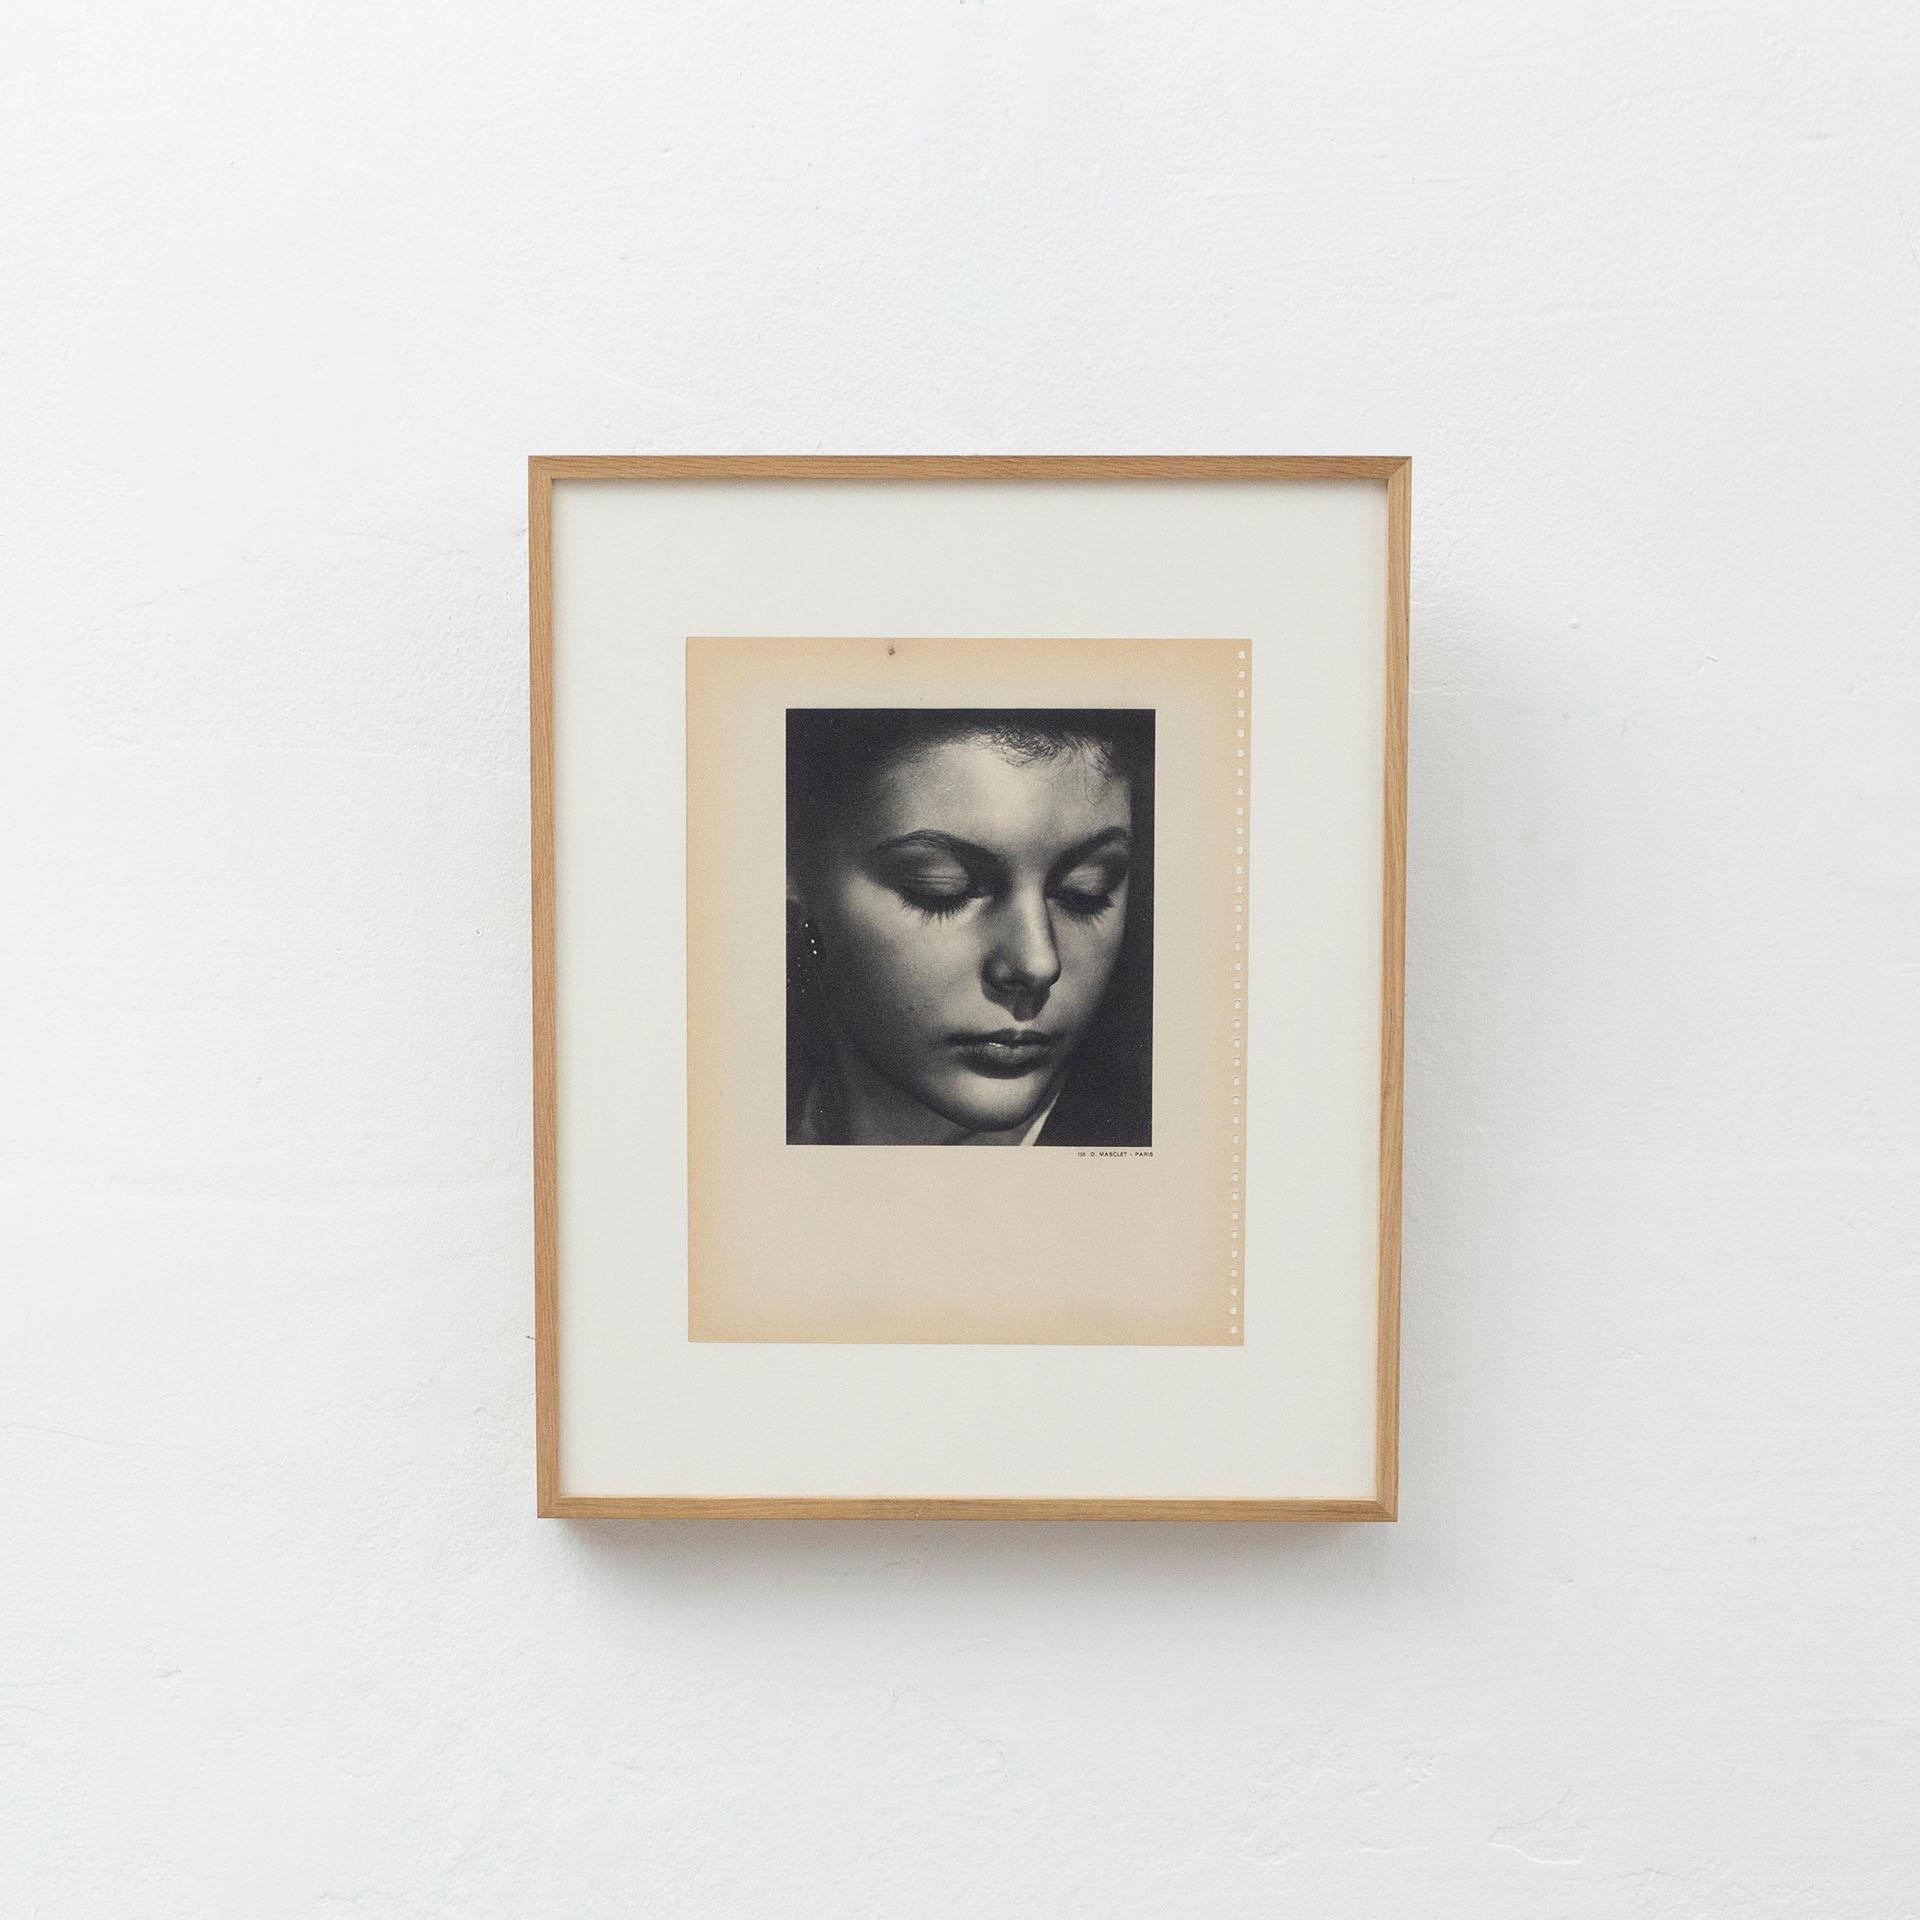 Vintage photo gravure by the French photographer Daniel Masclet.
Wood frame with passepartout and high quality museum's glass.

In original condition, with minor wear consistent with age and use, preserving a beautiful patina.